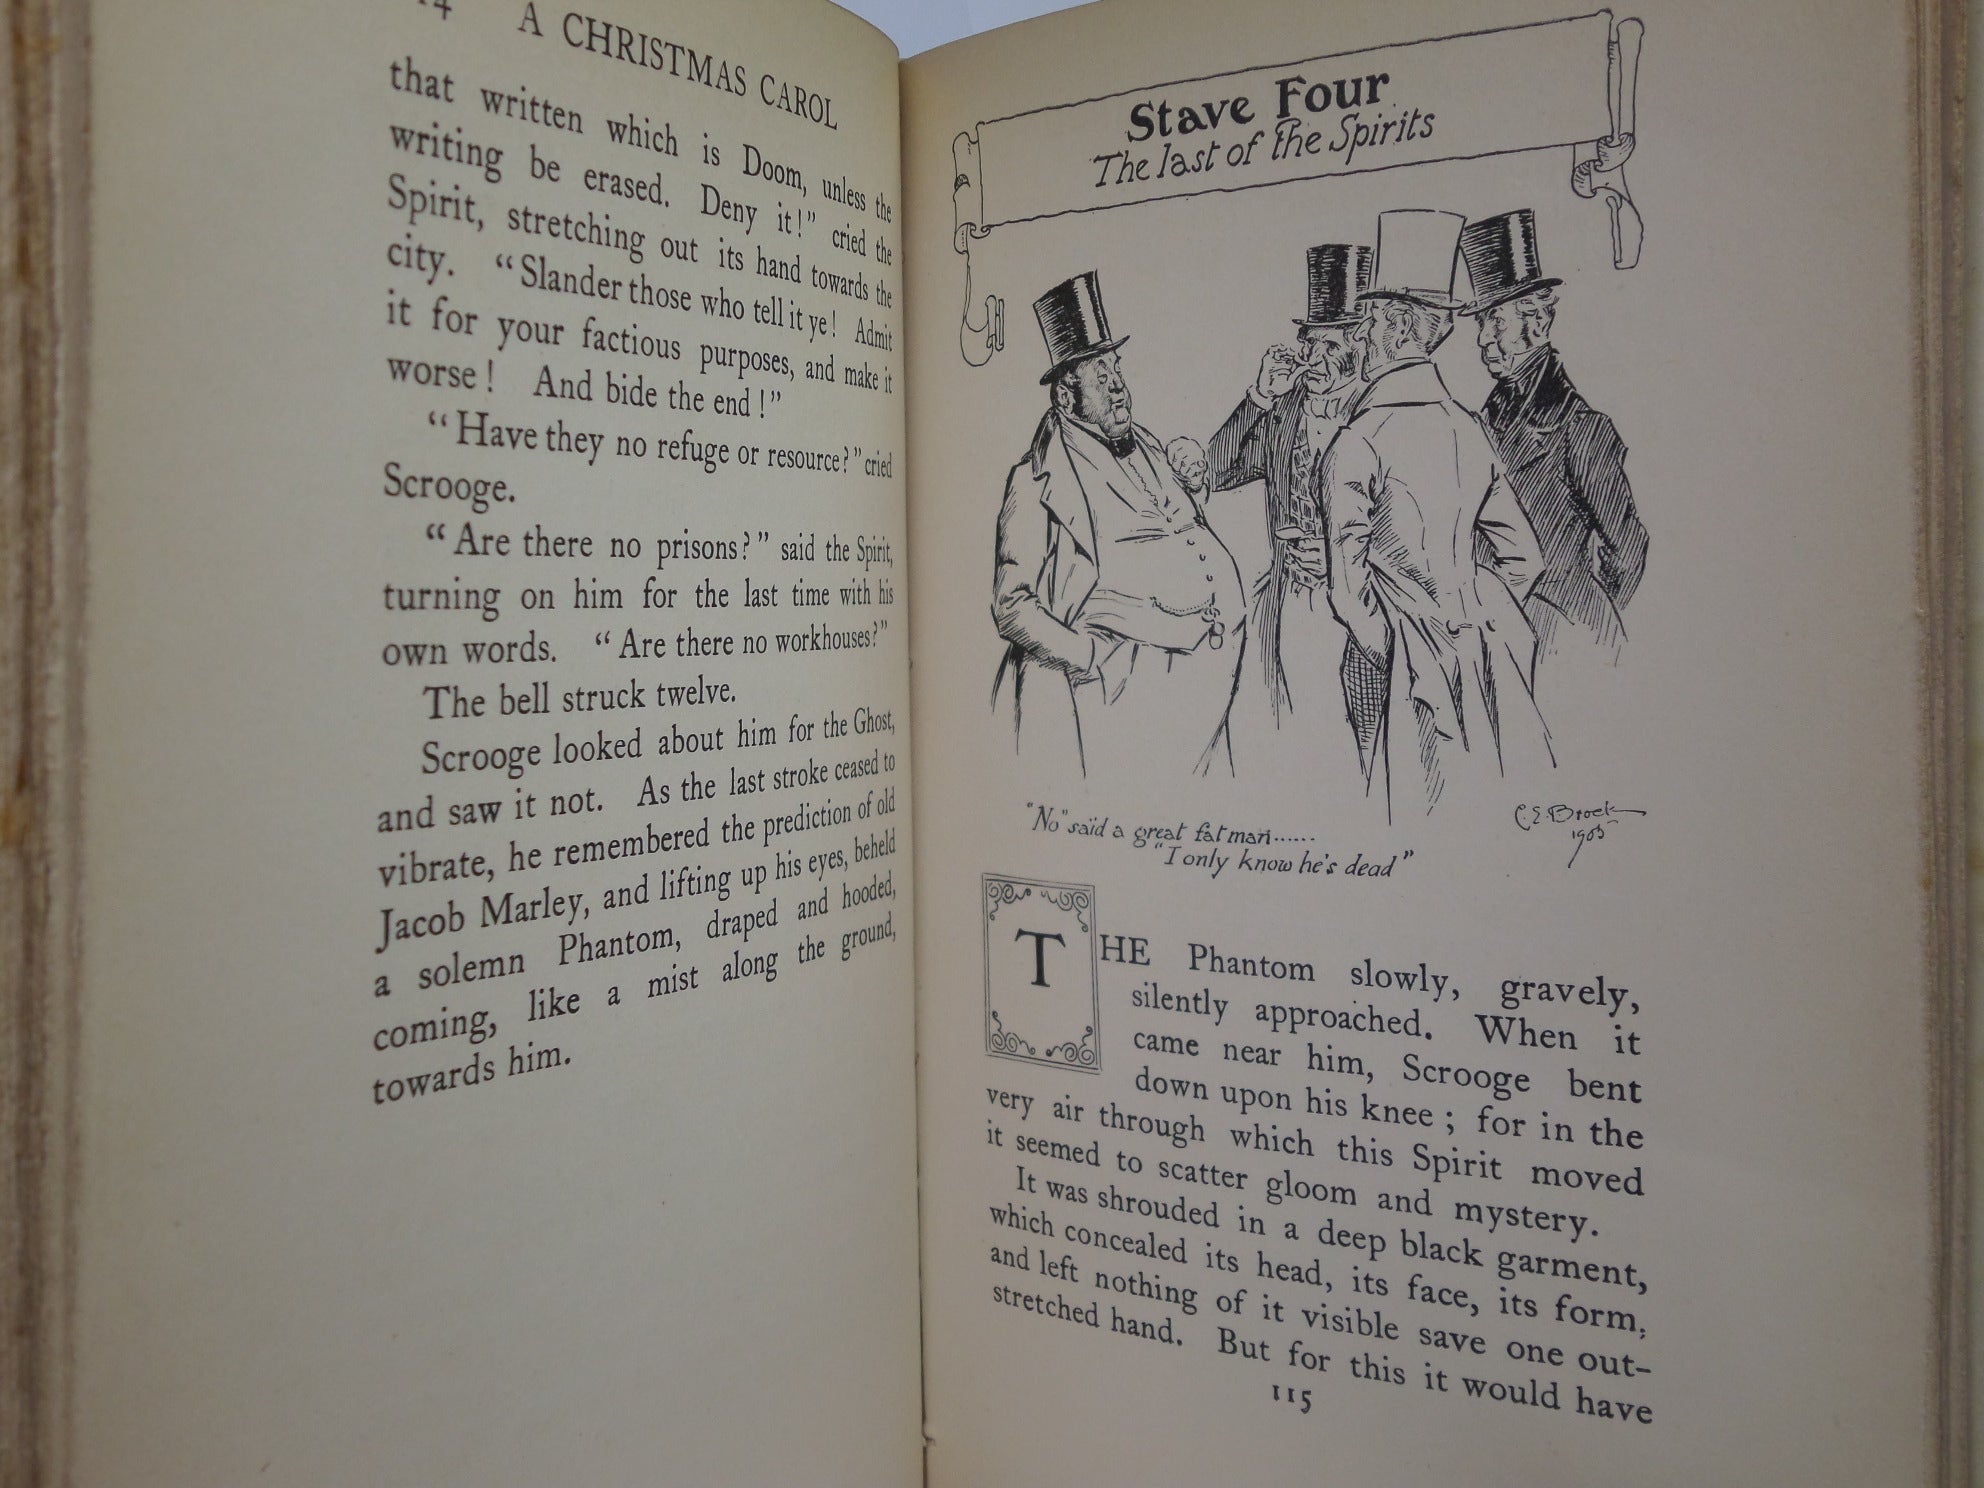 A CHRISTMAS CAROL BY CHARLES DICKENS 1905 DELUXE VELLUM BINDING, C. E. BROCK ILLUSTRATIONS